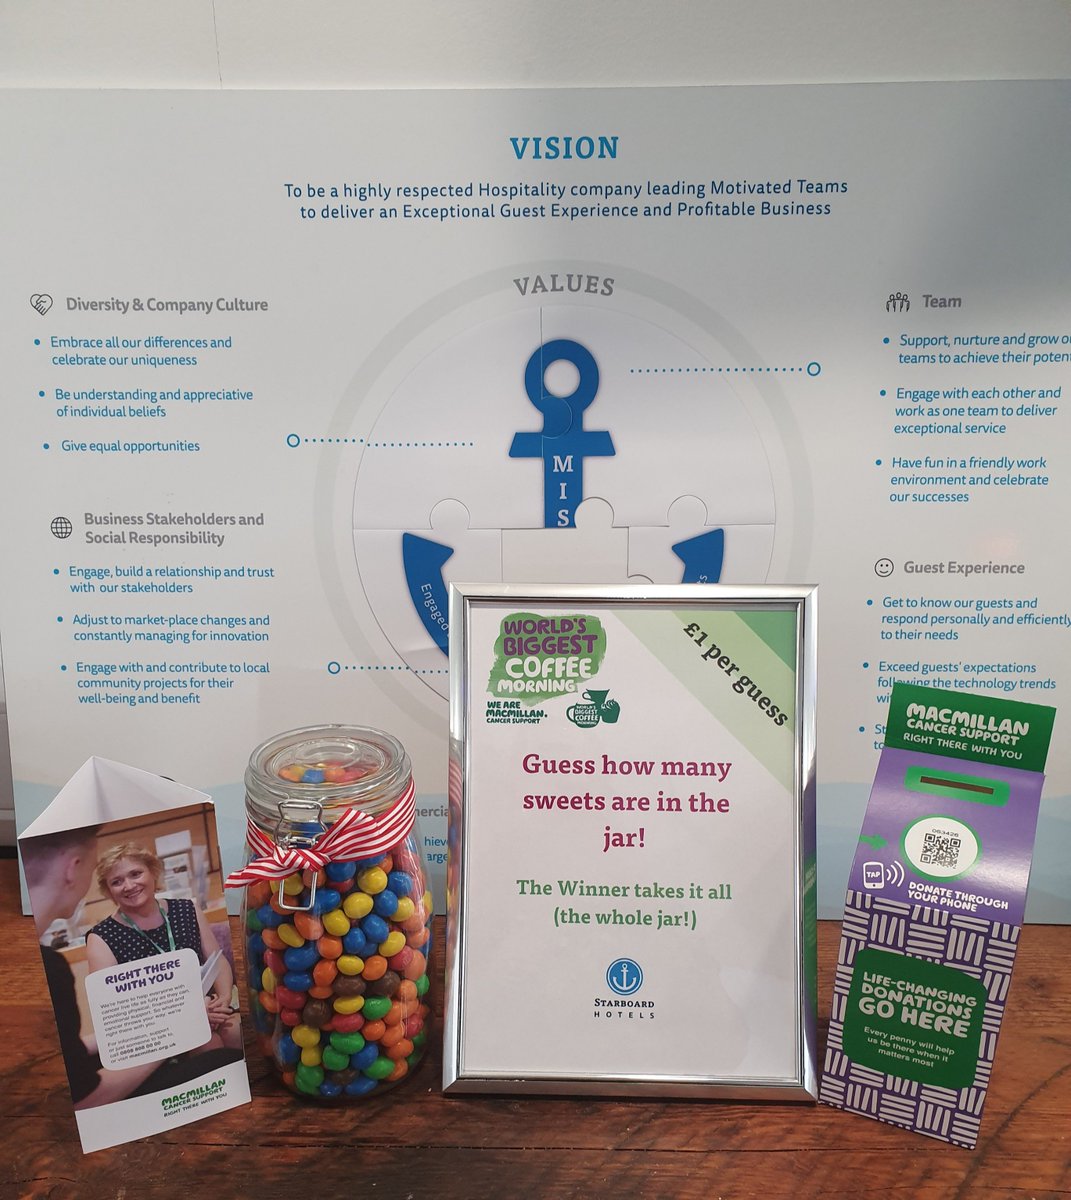 The team in Beaconsfield have a variety of sweet incentives planned in the lead up to our Macmillan Cancer Support coffee morning on Friday 27th, starting with guessing how many sweets are in the jar! 🍰☕ #MacmillanCoffeeMorning #WeAreMacmillan #LetsBrewThis #GetBaking